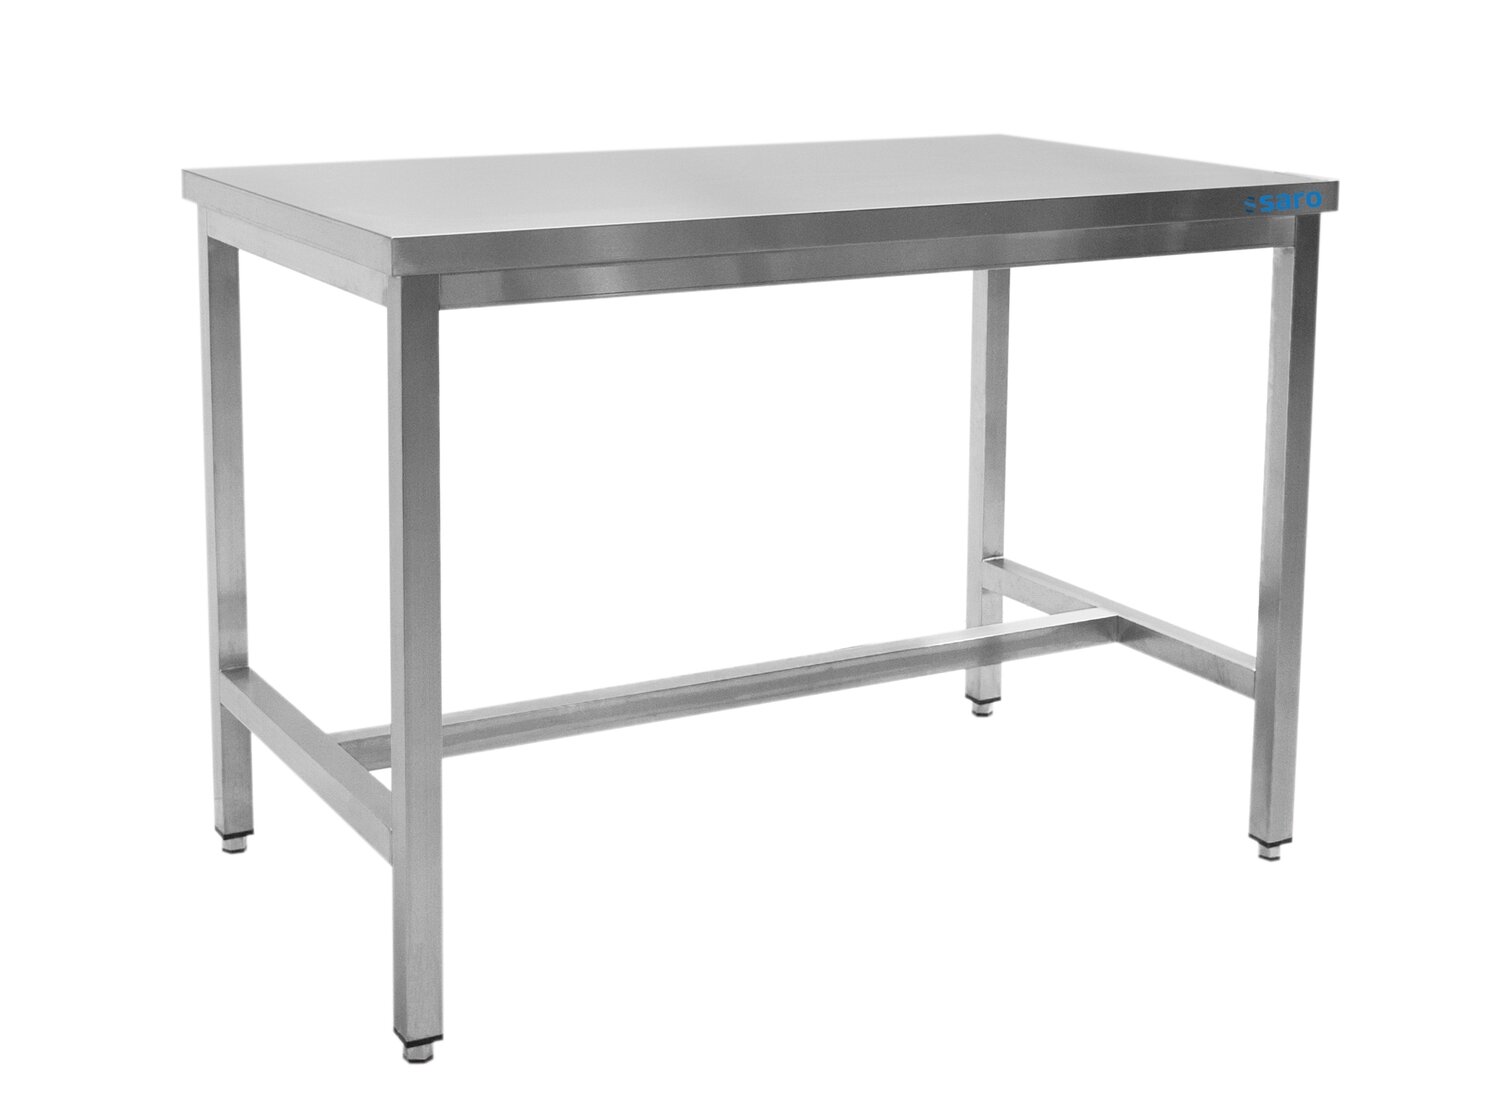 SARO Stainless steel table, without under shelf - 600 mm depth, 1400mm